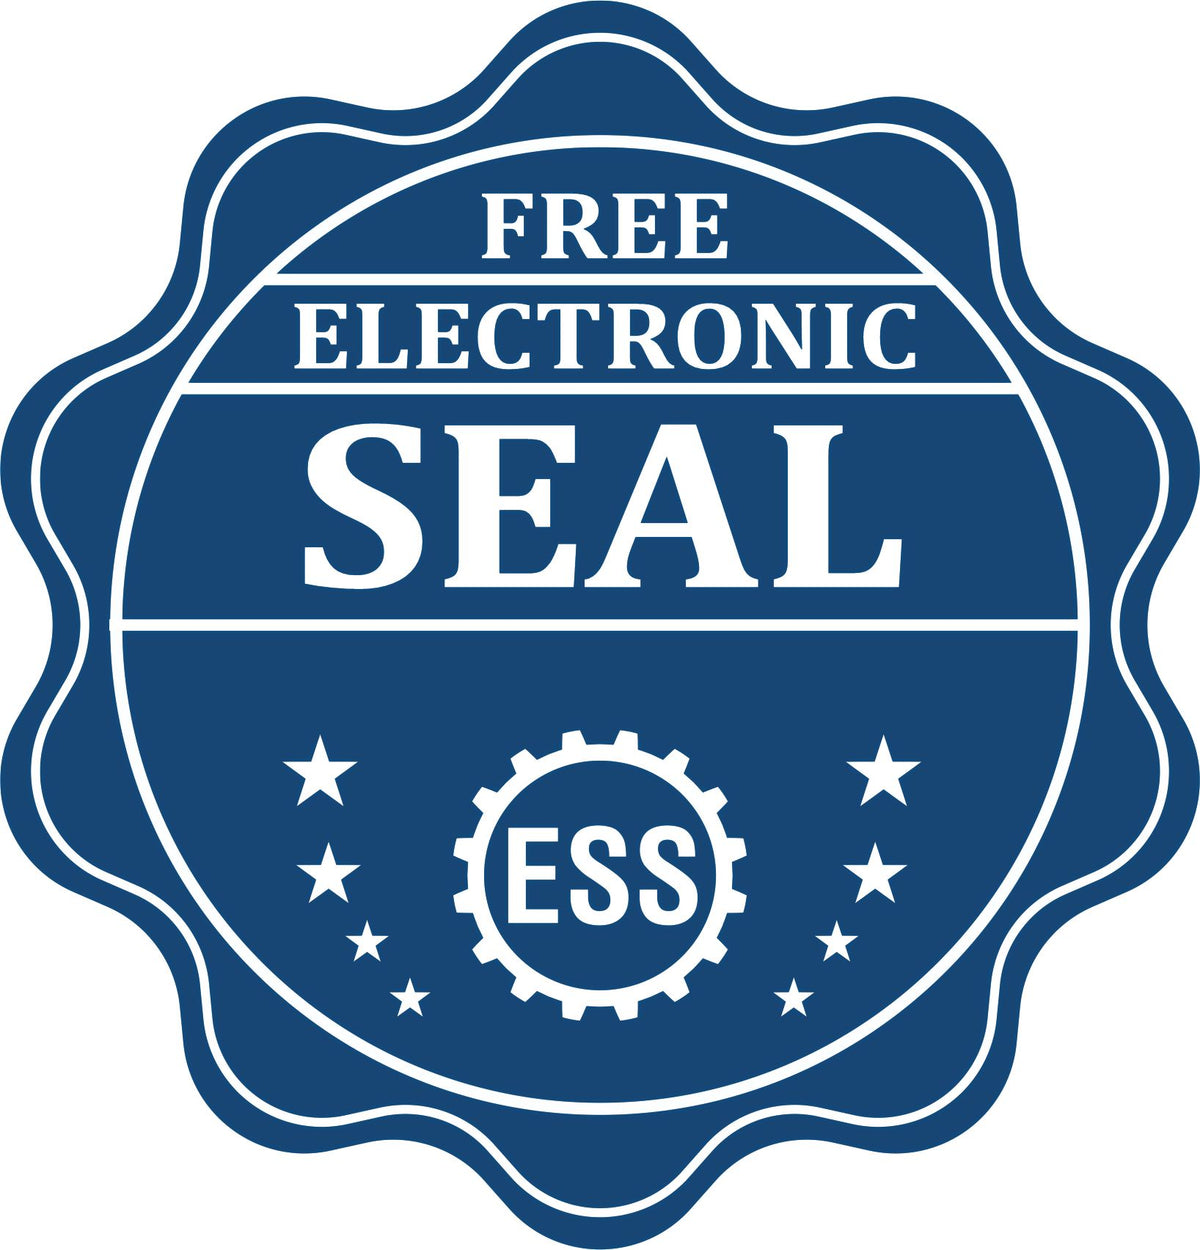 A badge showing a free electronic seal for the Utah Engineer Desk Seal with stars and the ESS gear on the emblem.